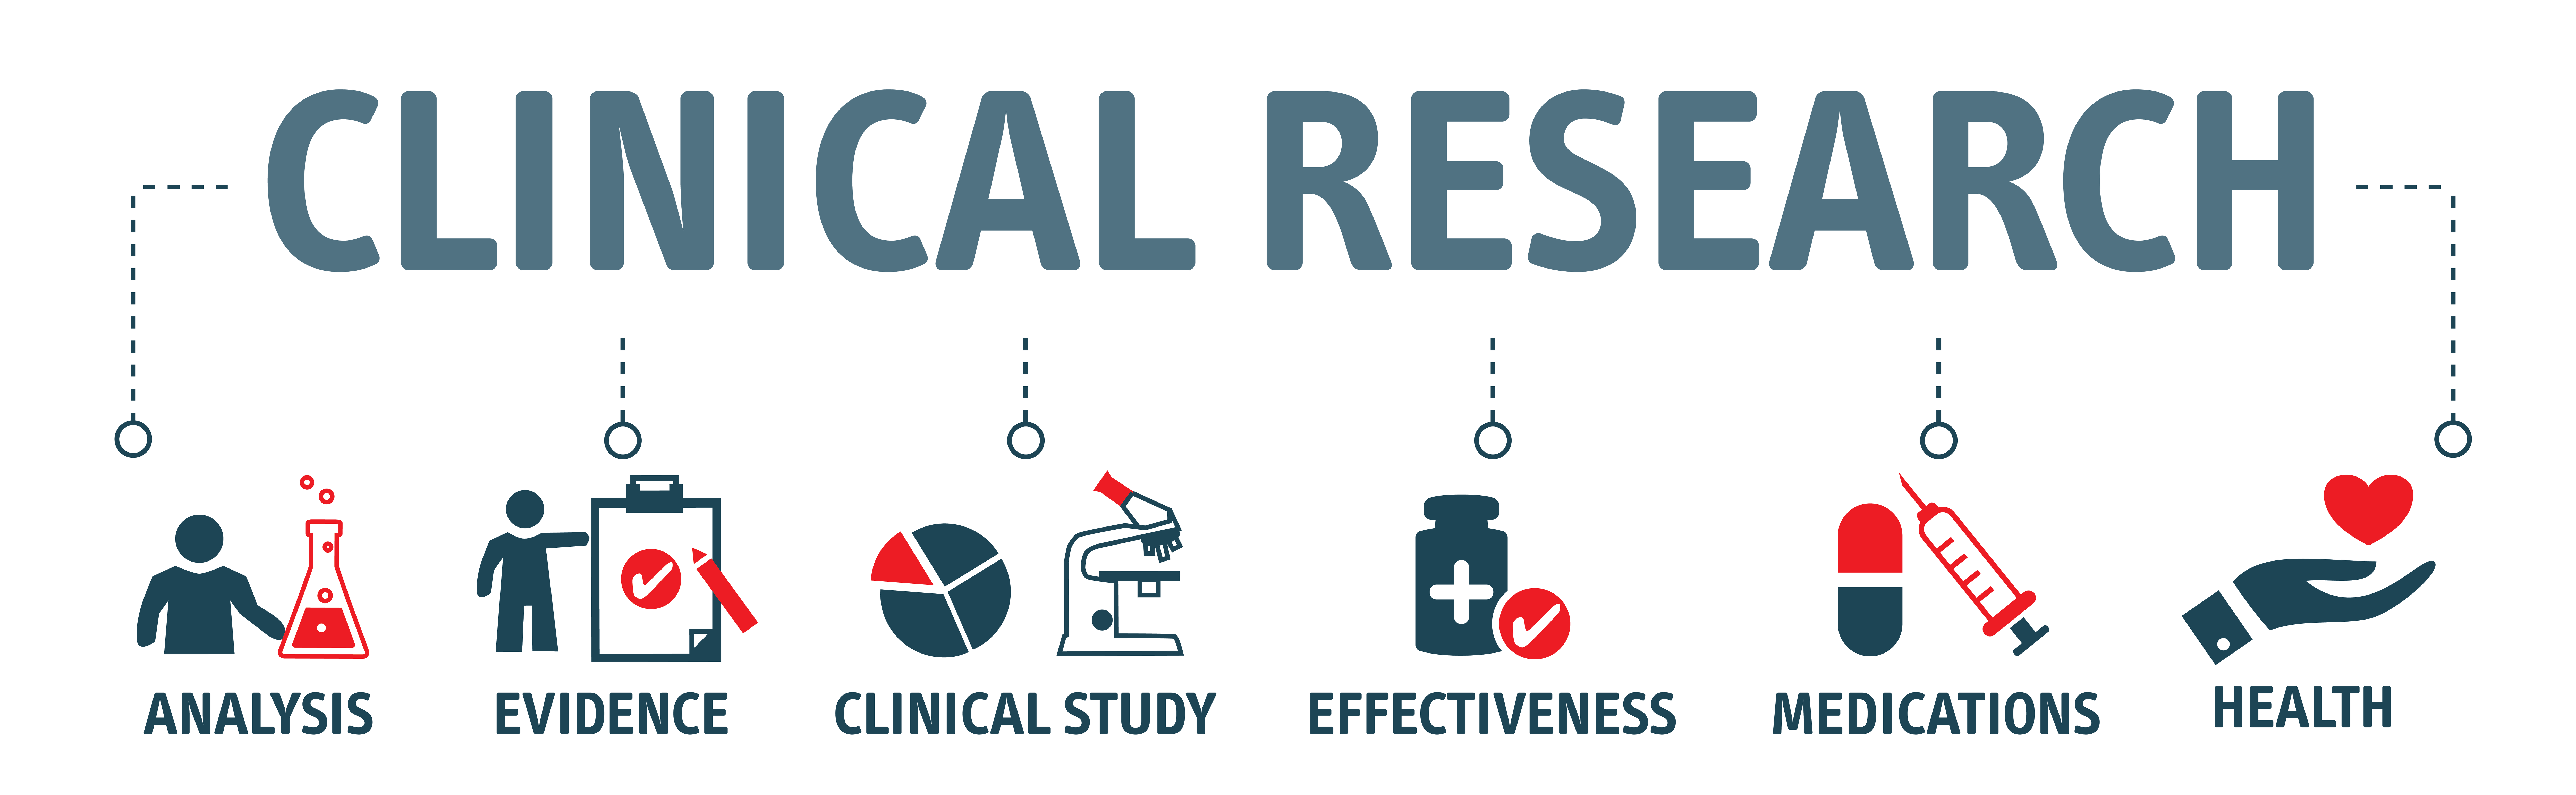 clinical-research-banner.png